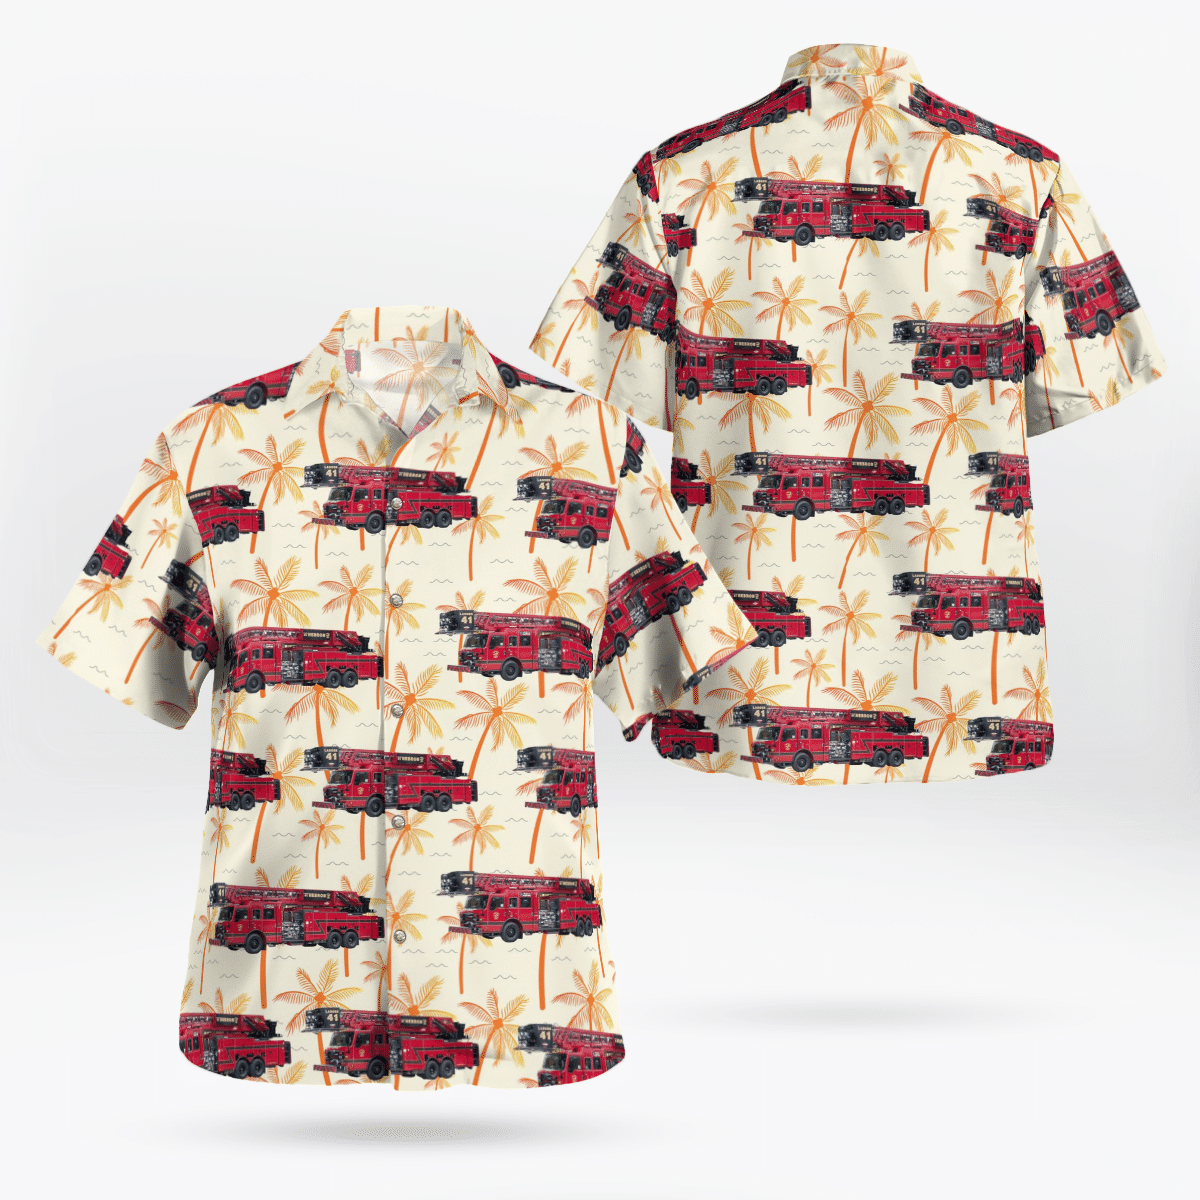 If you want to be noticed, wear These Trendy Hawaiian Shirt 127